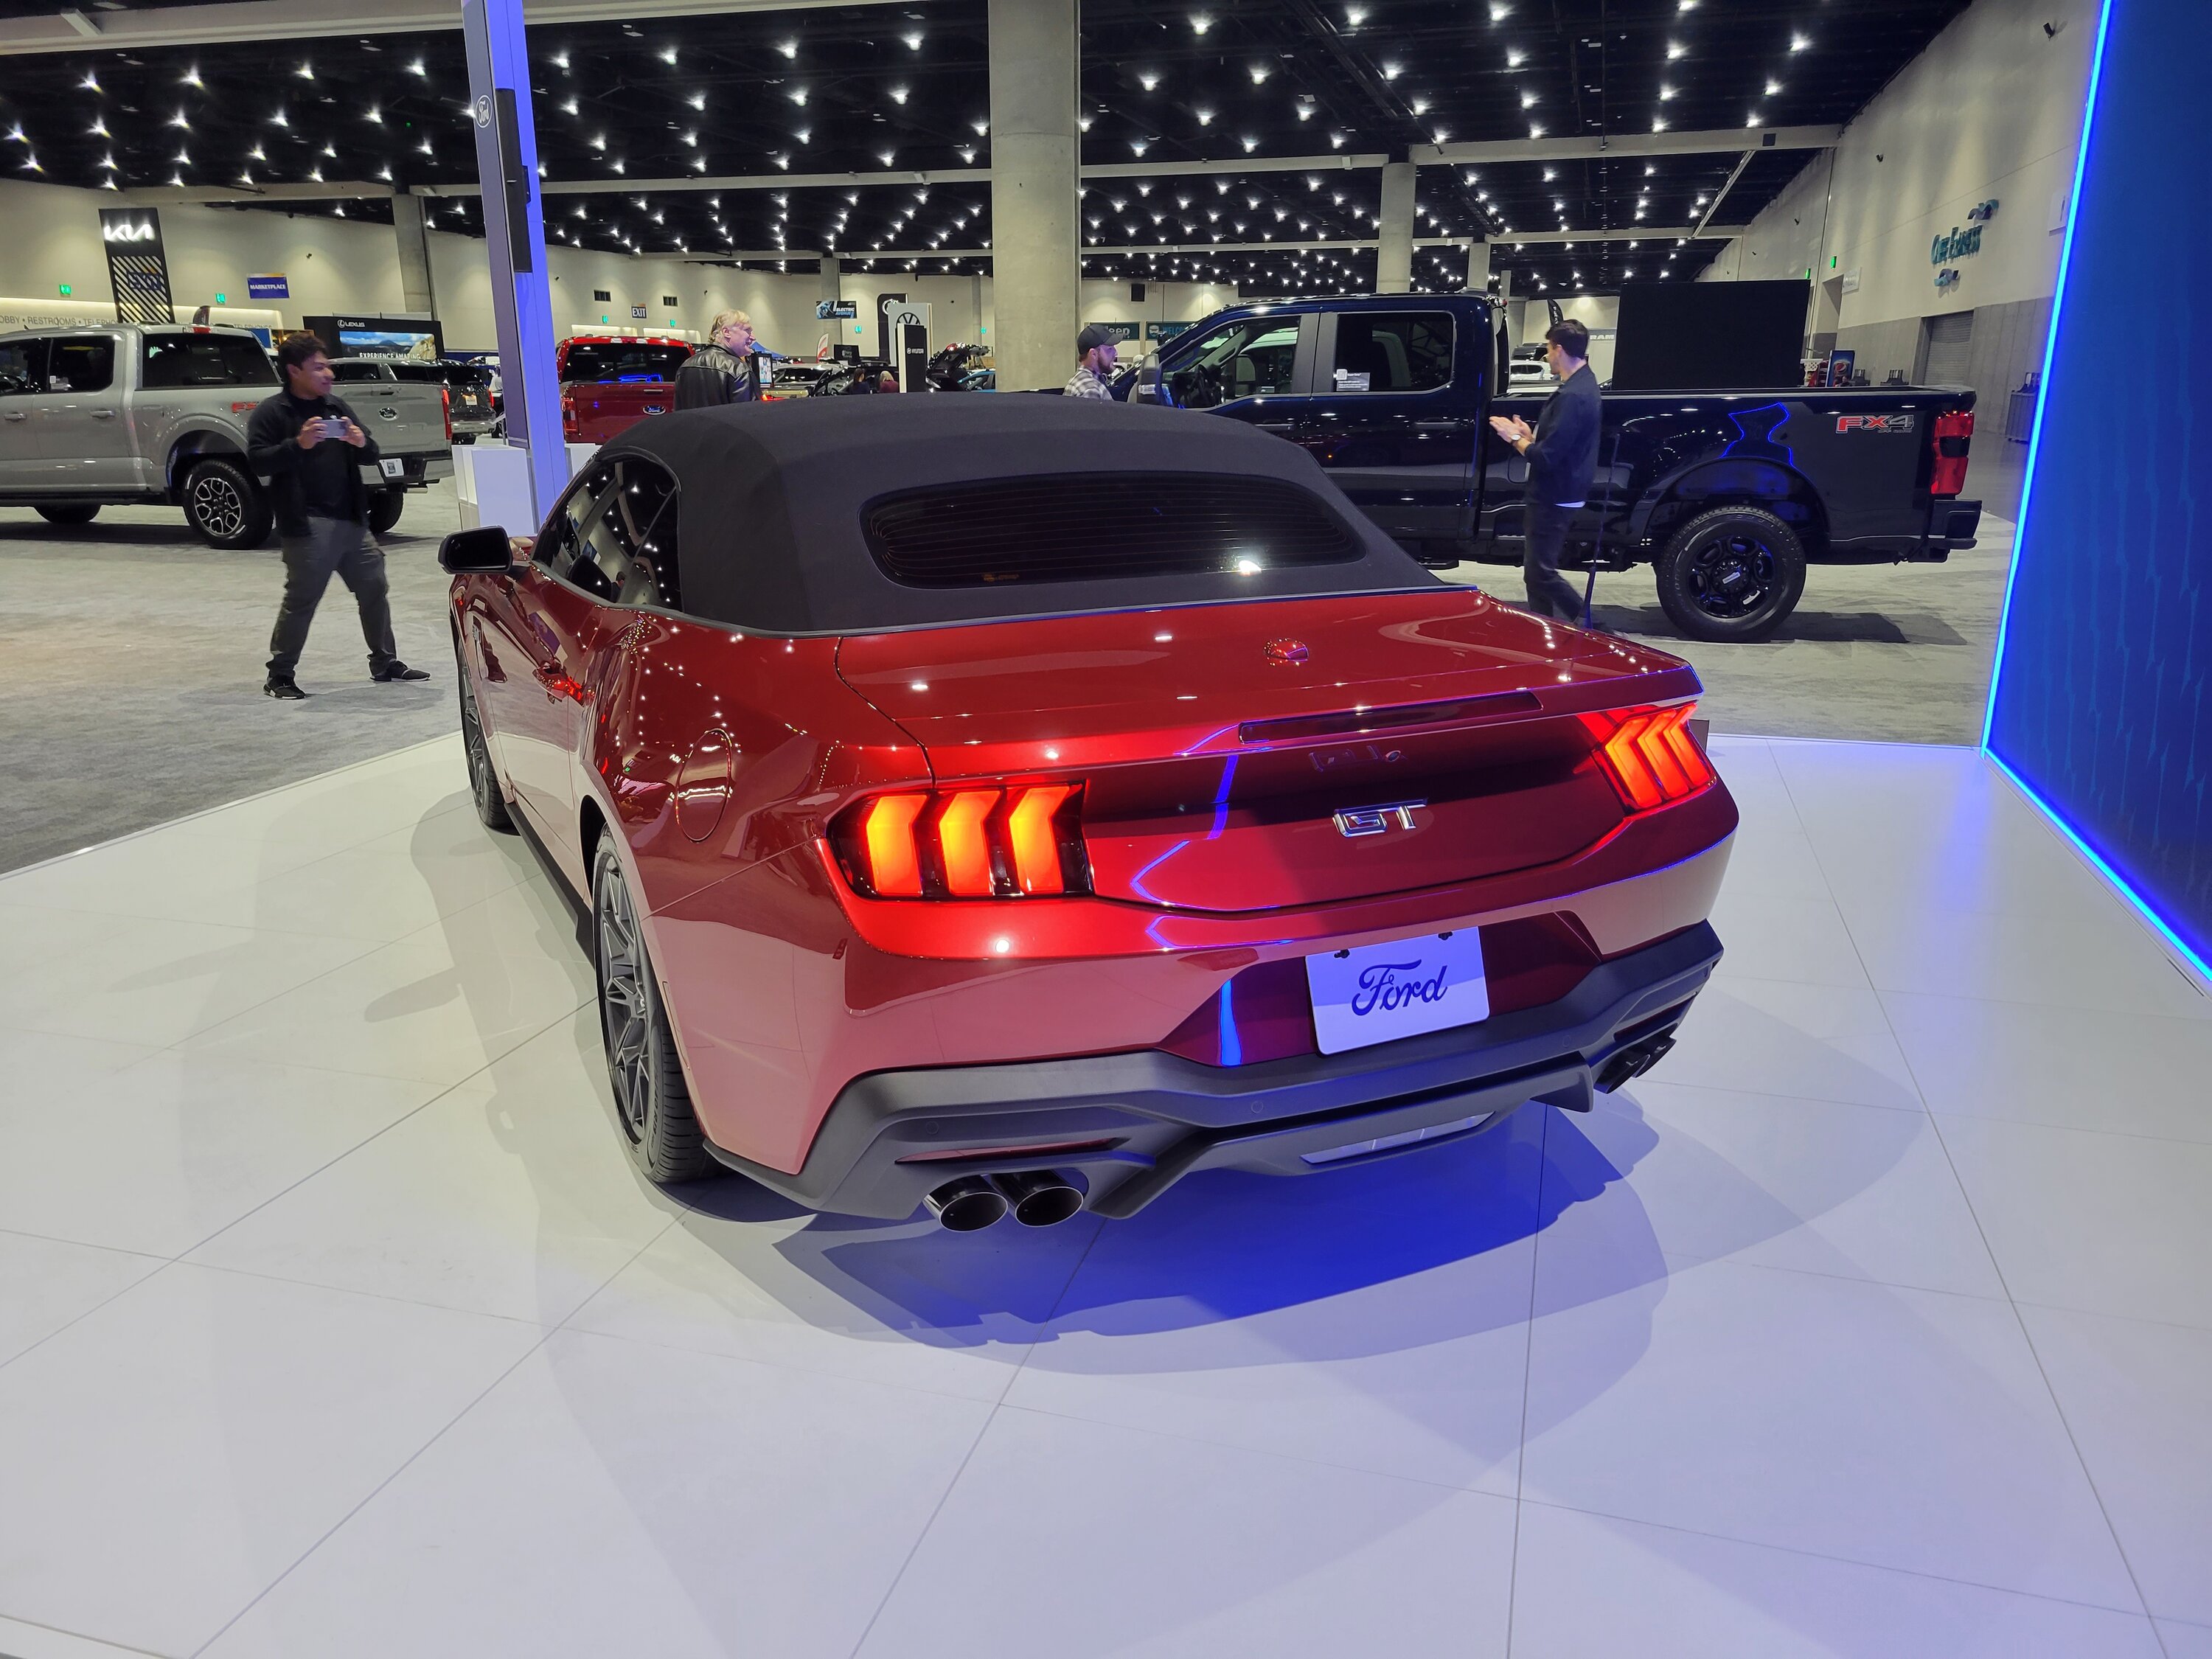 S650 Mustang S650 Convertible GT at the 2023 San Diego International Auto Show 20230102_101741